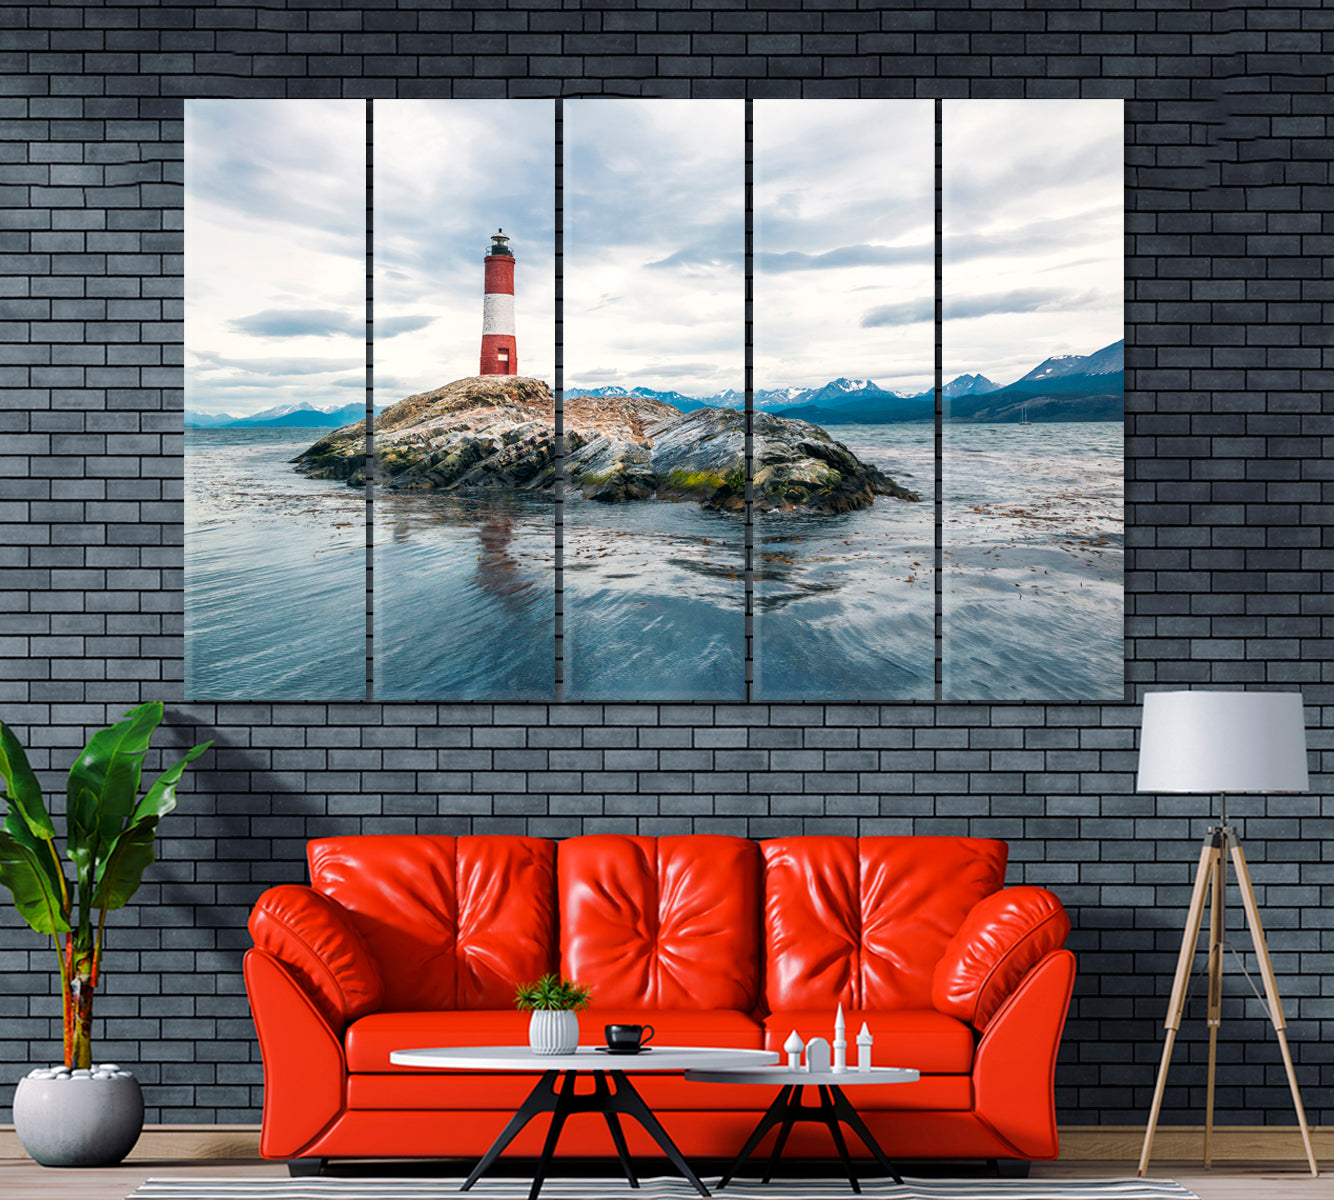 Les Eclaireurs Lighthouse Ushuaia Argentina Canvas Print ArtLexy 5 Panels 36"x24" inches 